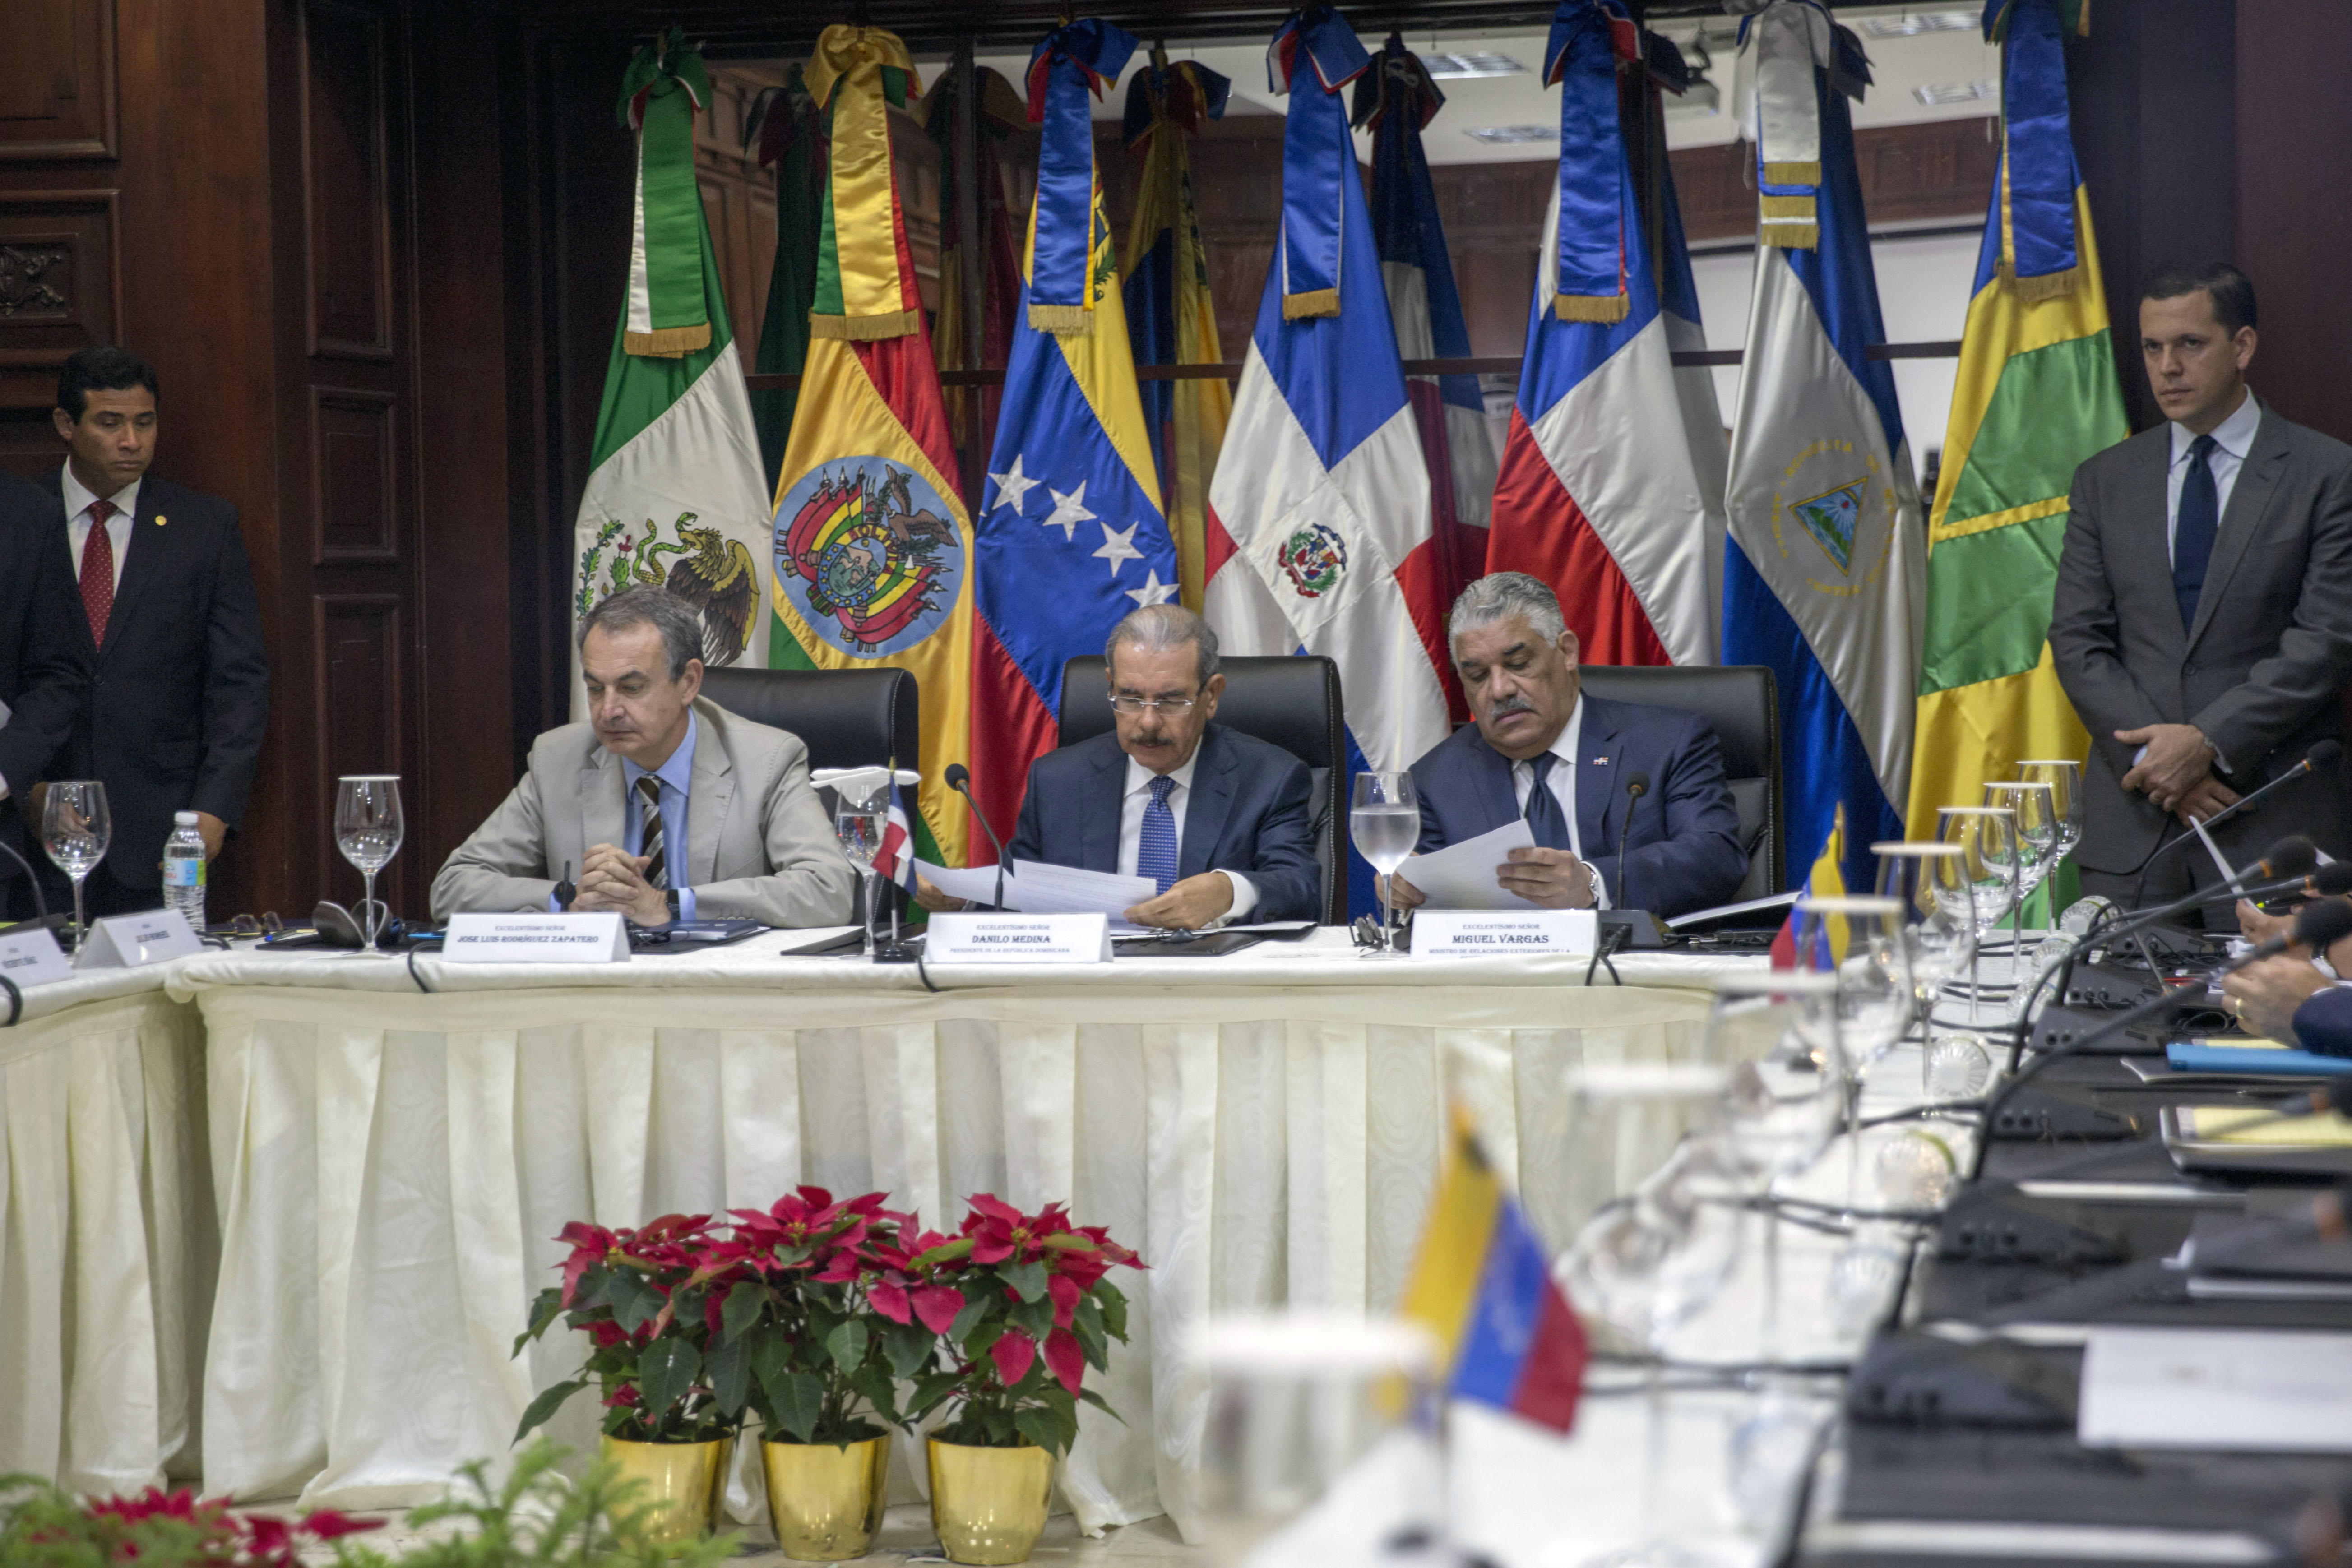 Former president of Spanish government Jose Luis Rodriguez Zapatero (L) Dominican President Danilo Medina (C) and Dominican Republic's Foreign Relations Minister Miguel Vargas Maldonado (2-R) take part in a meeting between representatives of the Venezuelan government and members of the opposition, at the Dominican Ministry of Foreign Affairs in Santo Domingo on December 1, 2017.  Amid marked scepticism Nicolas Maduro's government representatives and members of the Venezuelan opposition resumed mediated negotiations on Friday to seek for a solution to the deep crisis installed in the country.  / AFP PHOTO / Erika SANTELICES